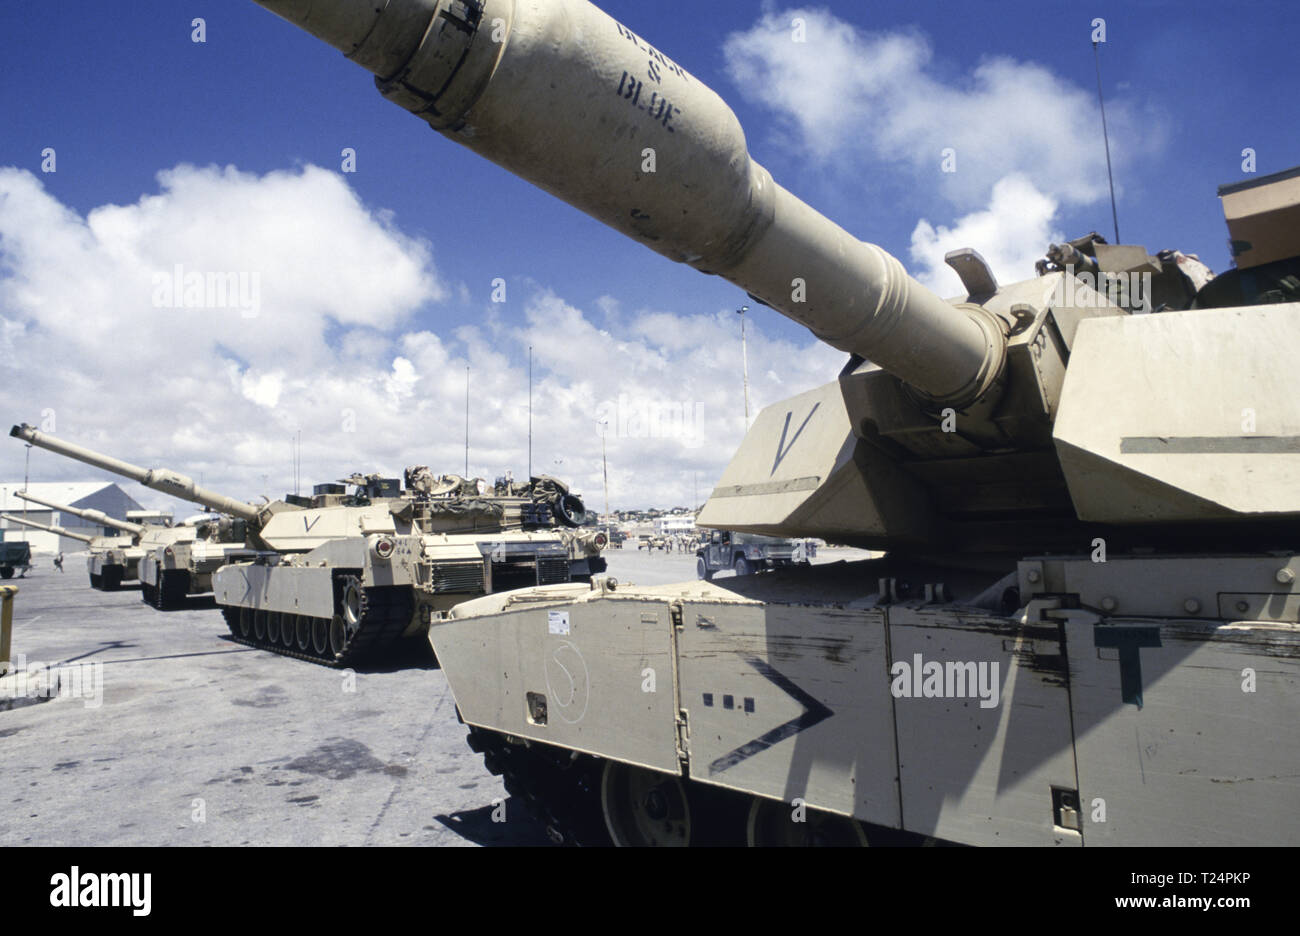 30th October 1993 U.S. Army M1A1 Abrams tanks of the 24th Infantry Division, 1st Battalion of the 64th Armored Regiment lined up in the new port in Mogadishu, Somalia where they have just arrived by sea. Stock Photo